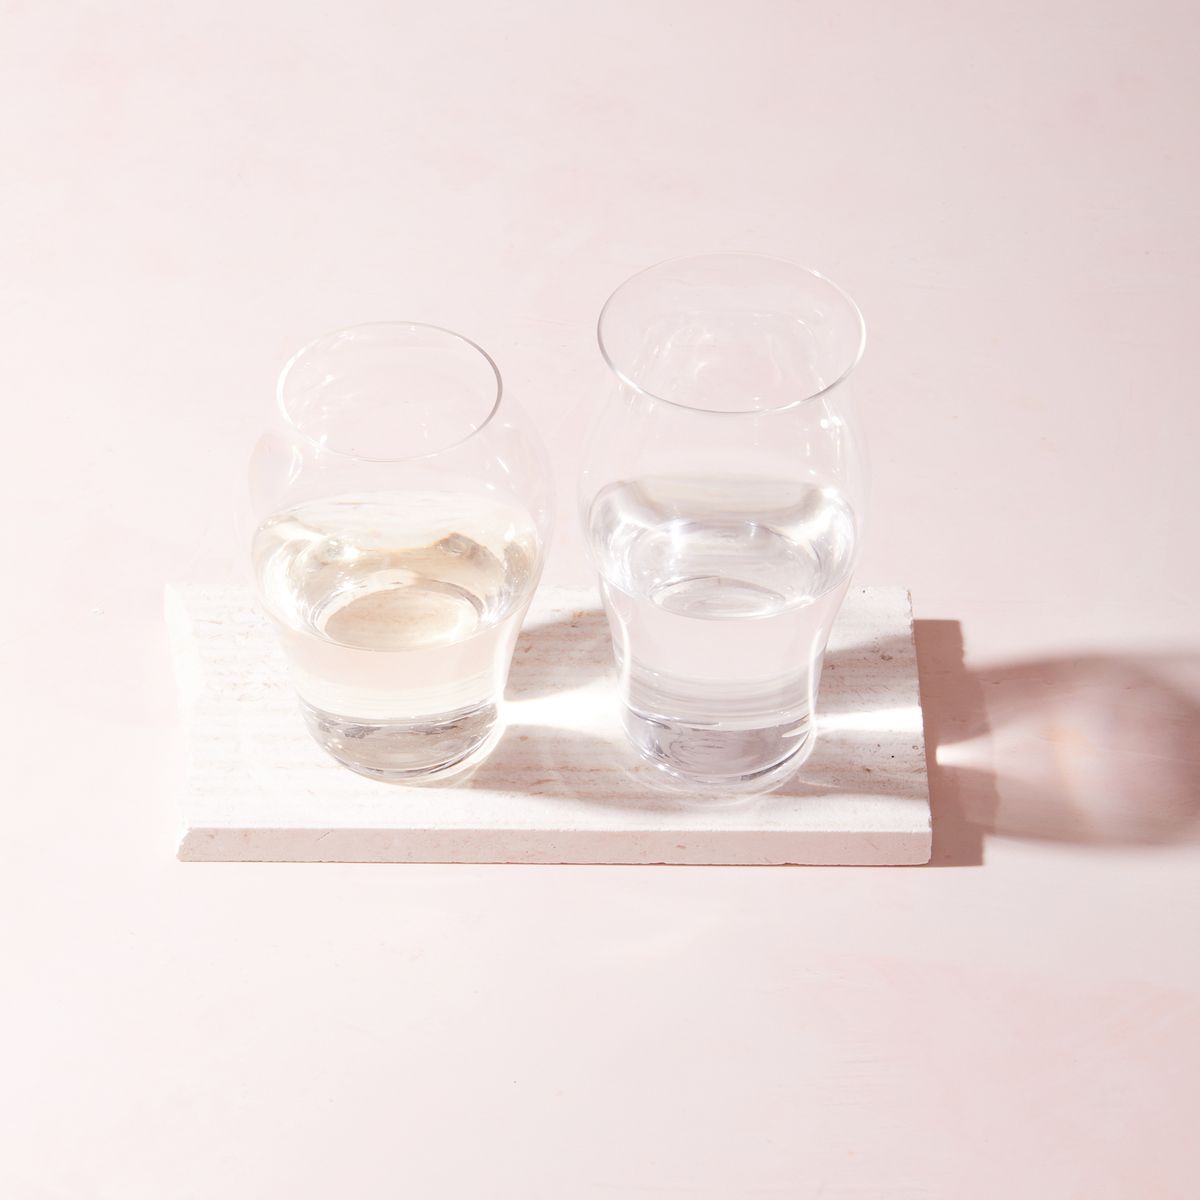 Two clear glasses filled with water, one taller than the other, both with curved bodies, sitting on a rectangular piece of wood